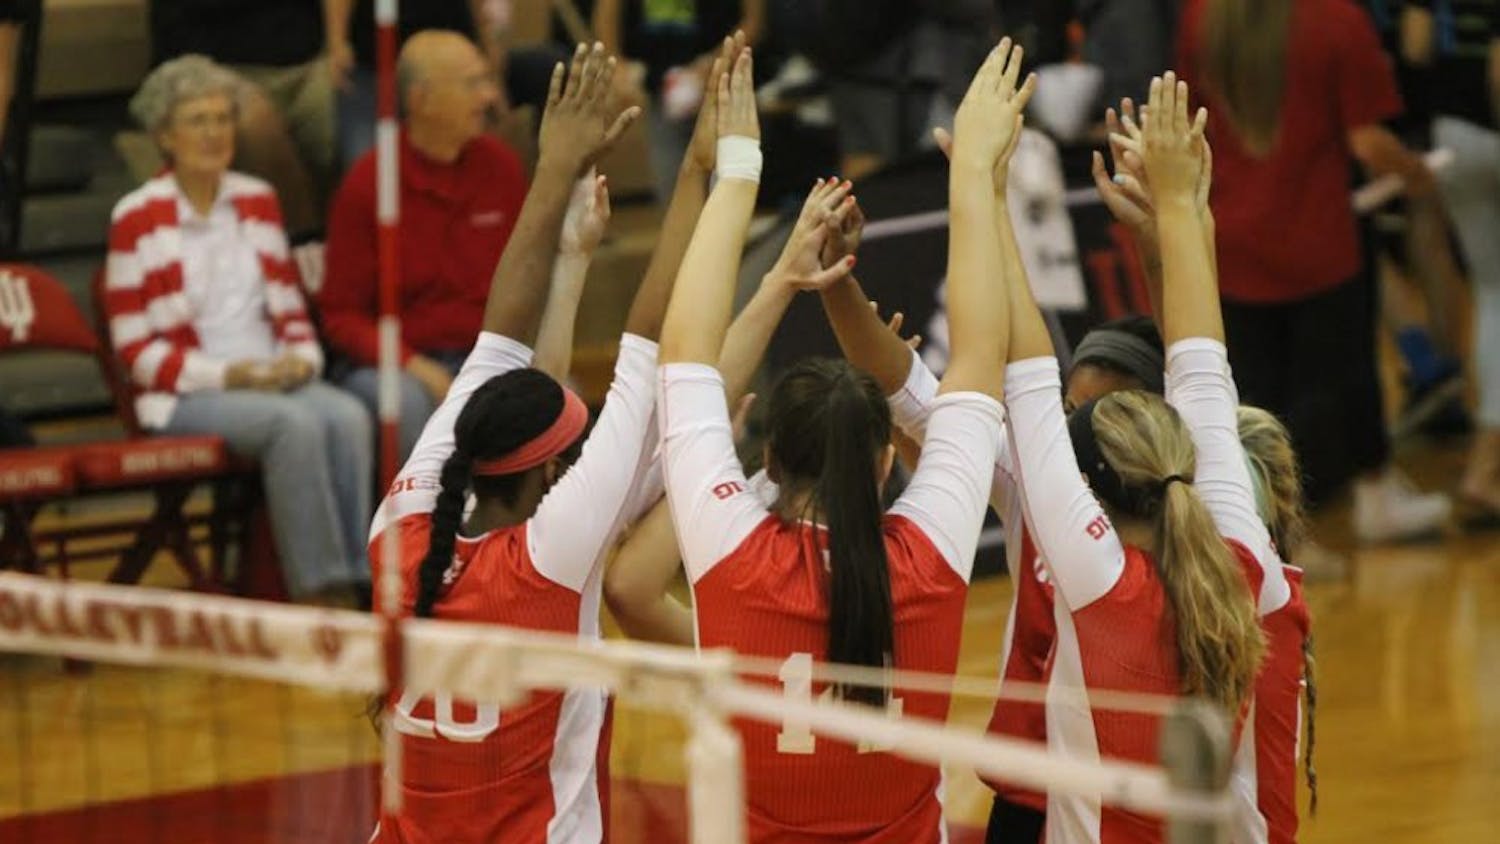 The IU volleyball team huddles during a 2015 game against Bowling Green at the University Gym in Bloomington. The team is 4-1 in 2018 under new coach Steve Aird.